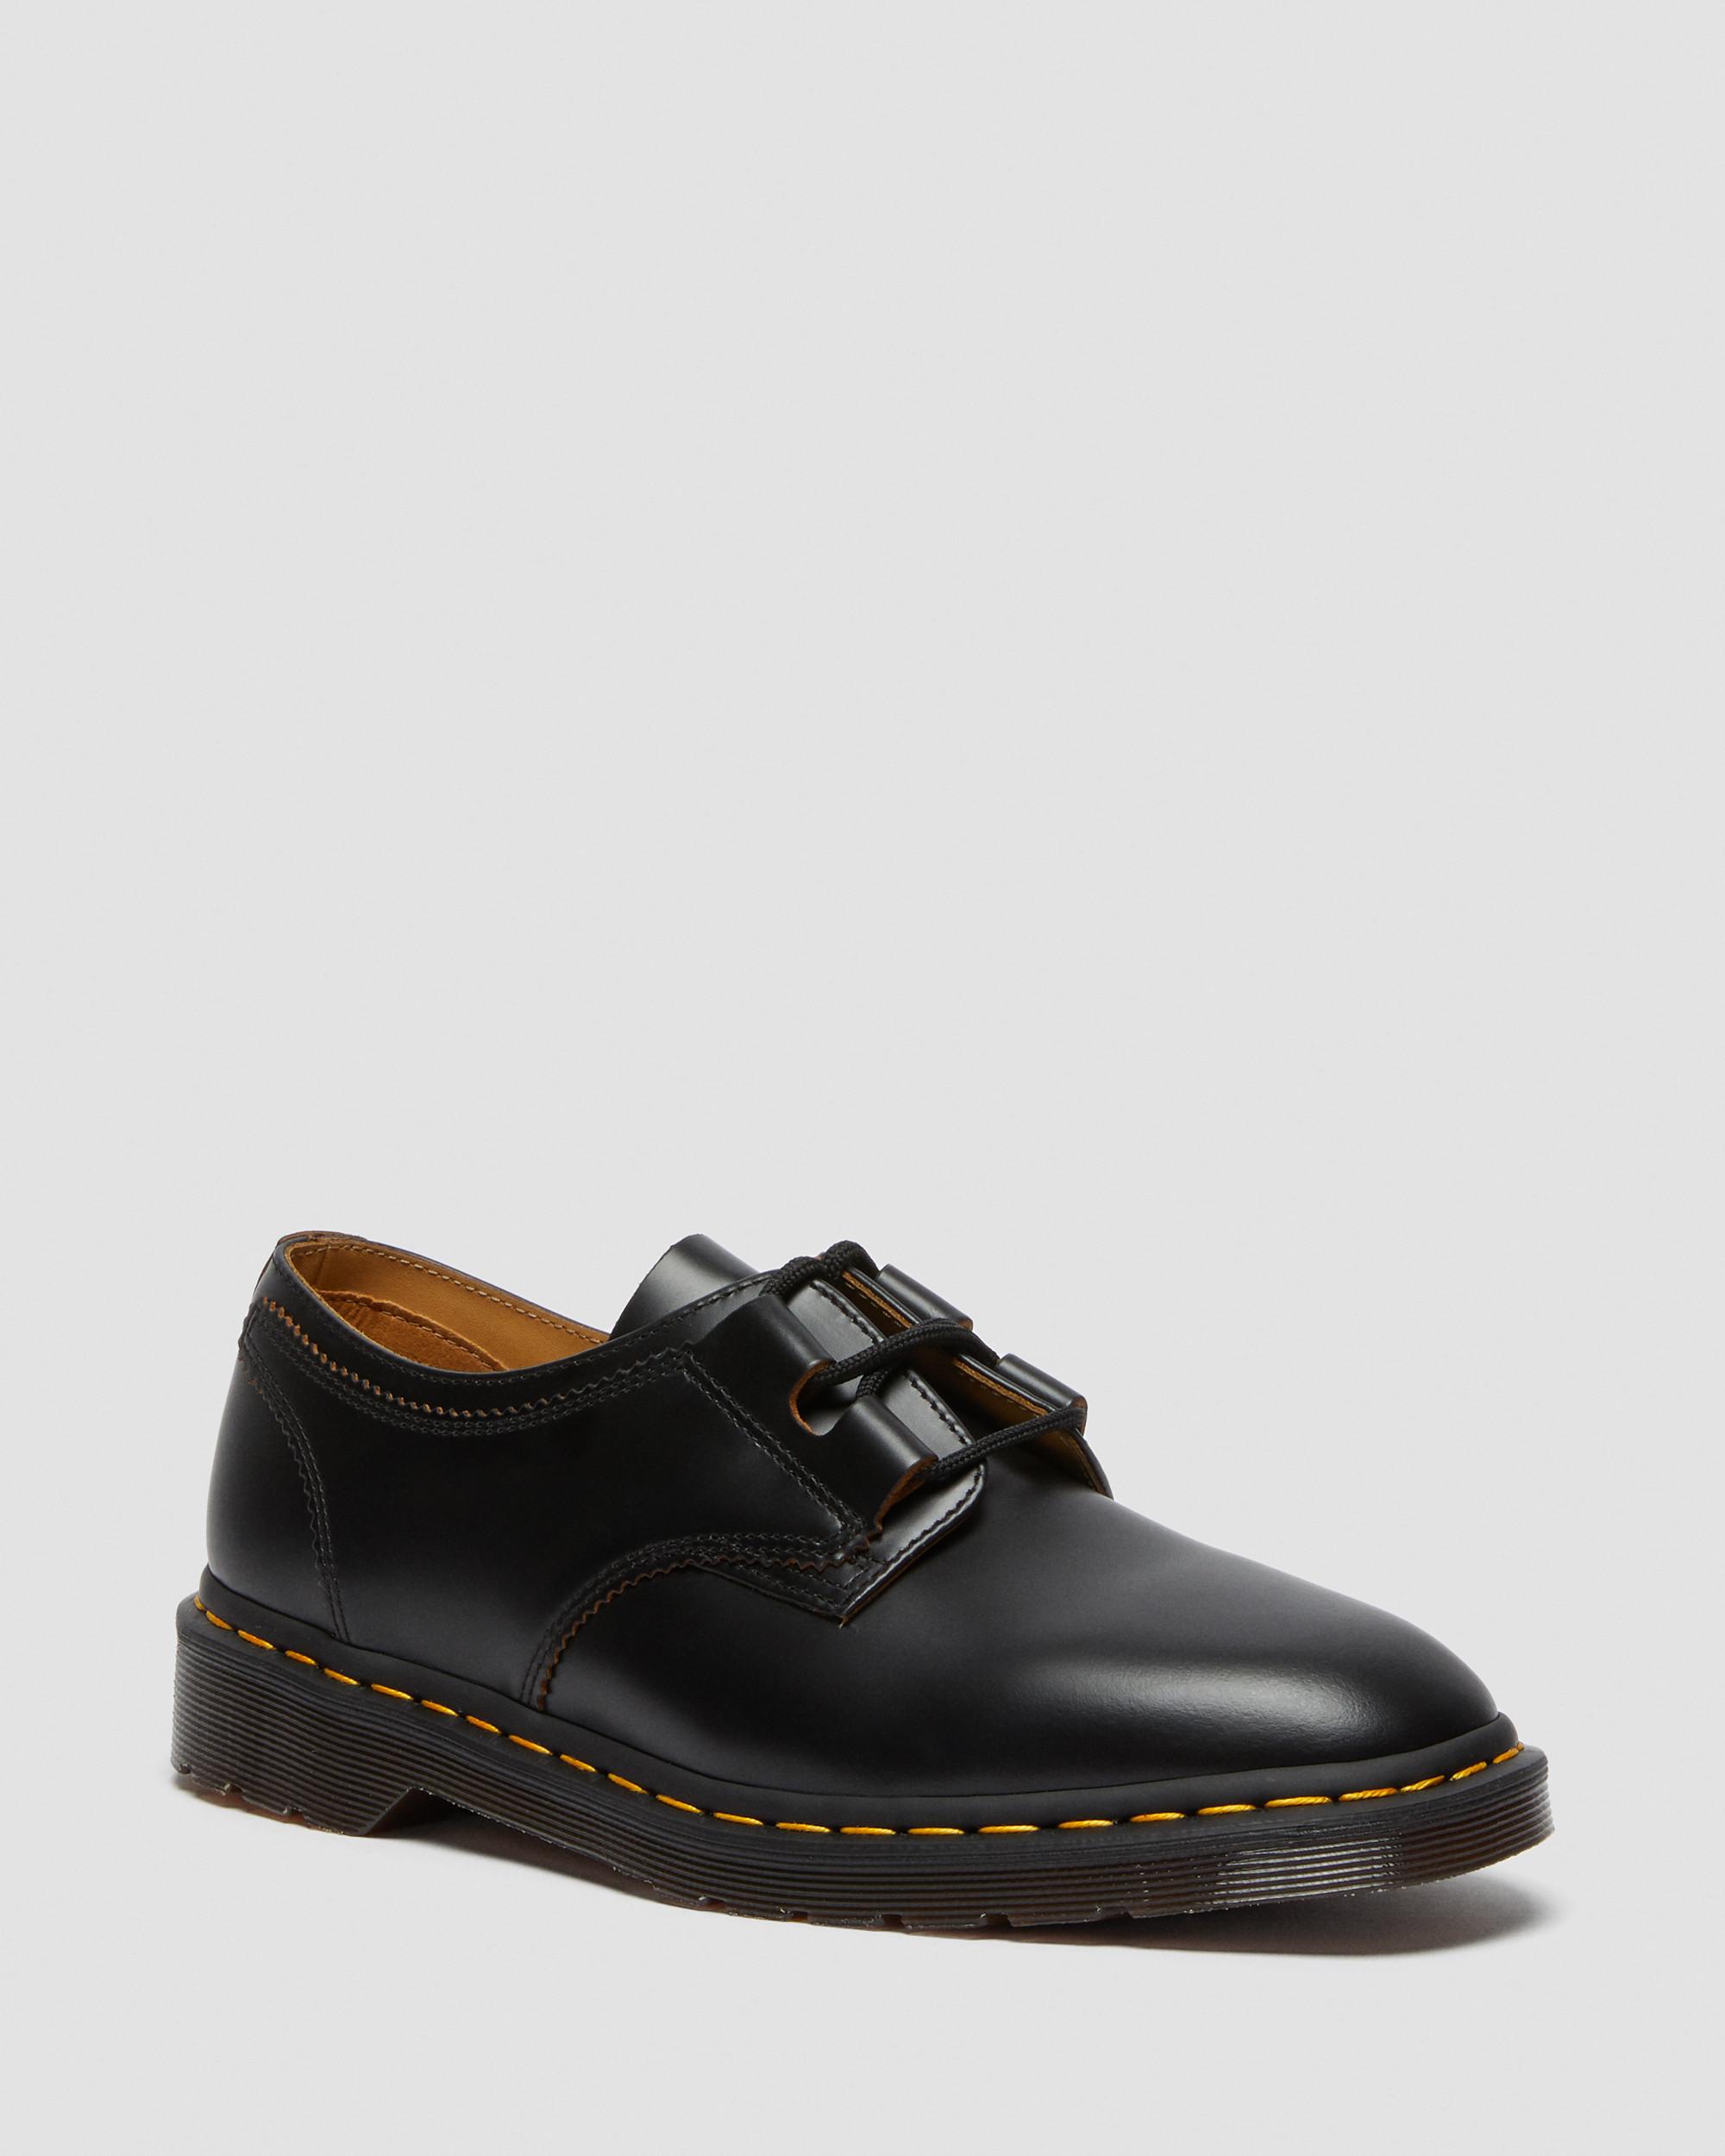 1461 Ghillie Leather Oxford Shoes1461 Ghillie Leather Oxford Shoes Dr. Martens